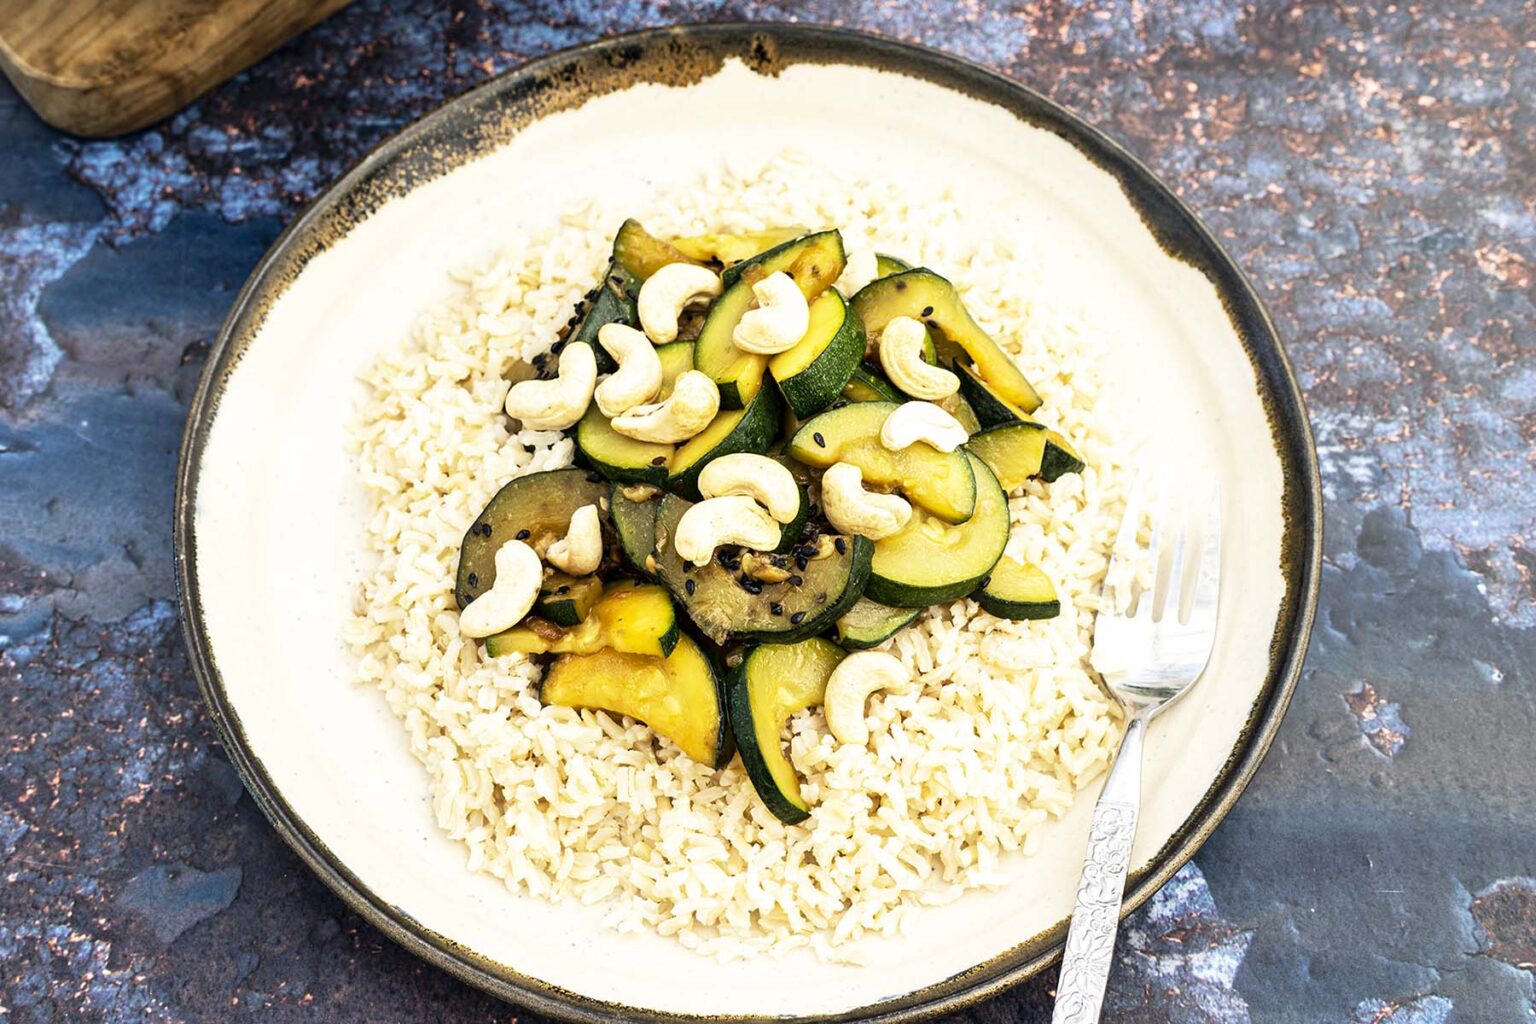 Courgette stir fry - Cook Veggielicious